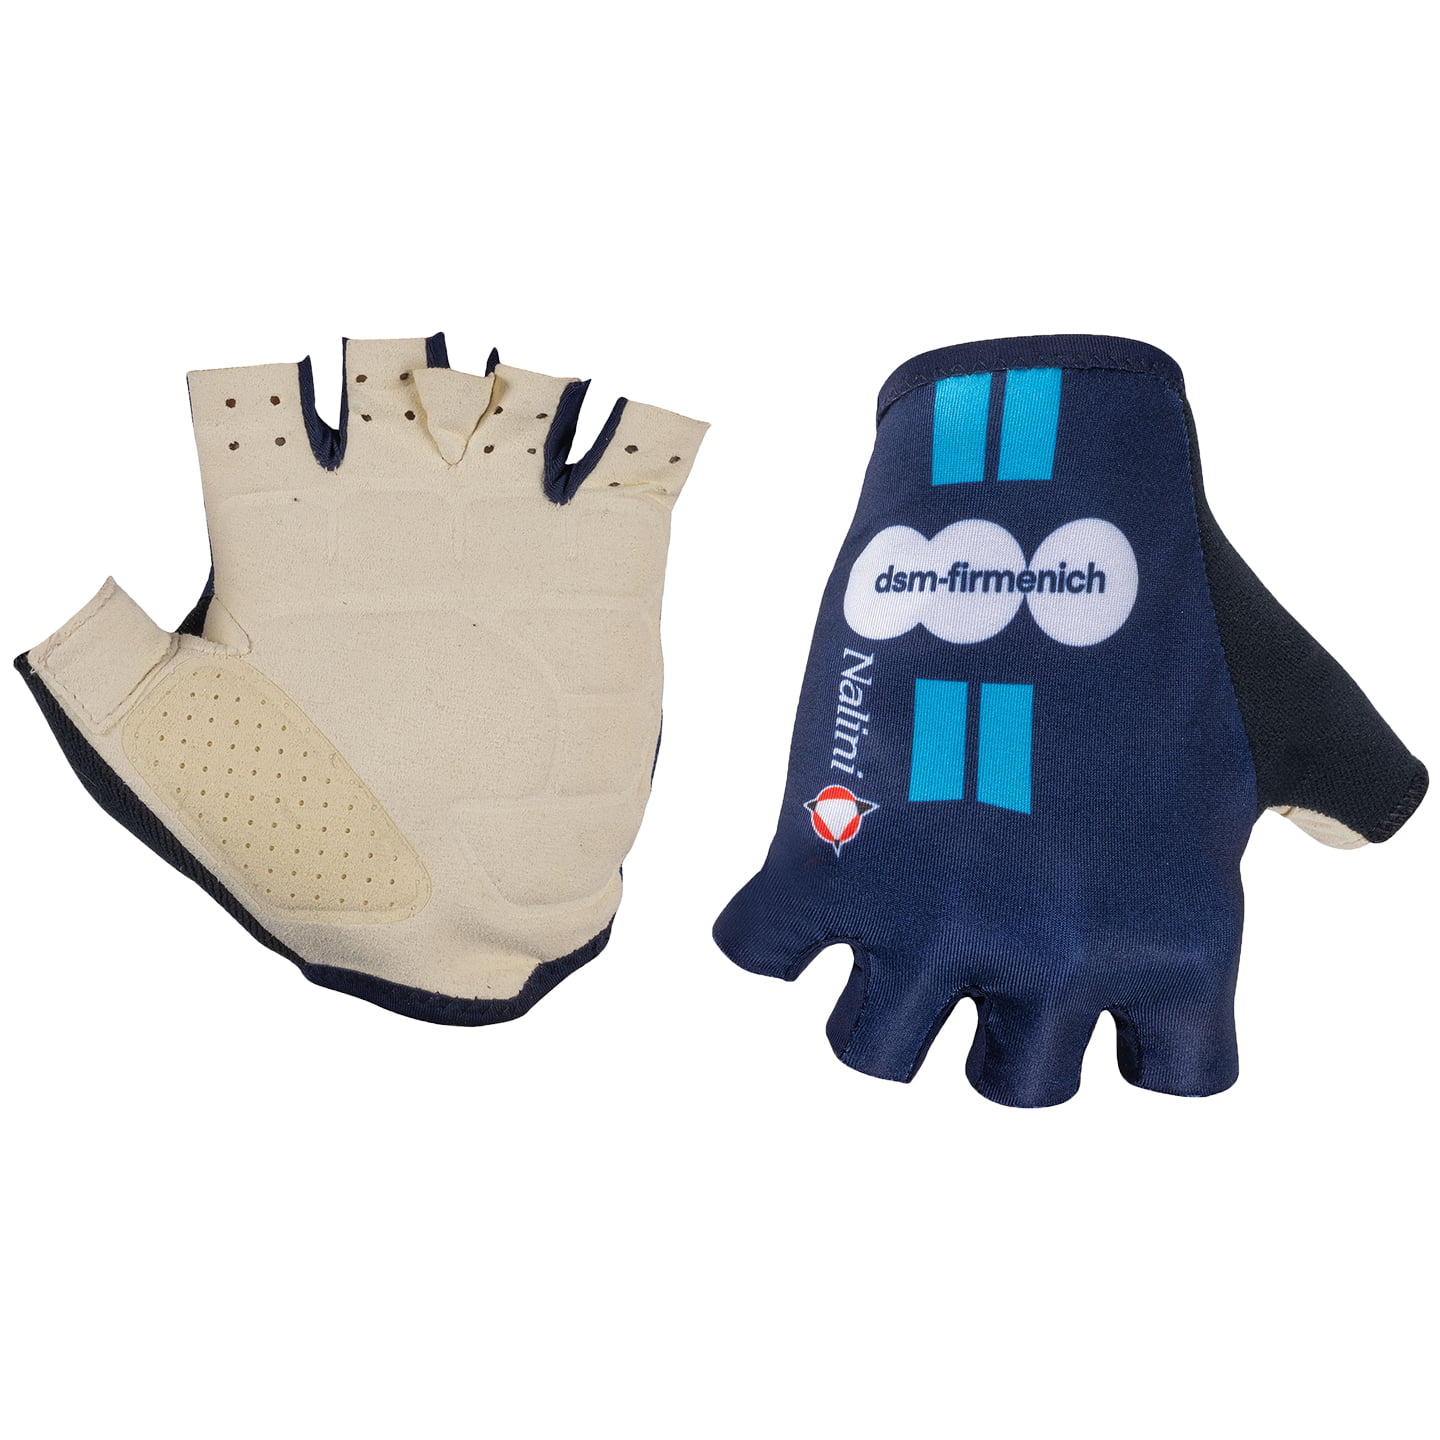 TEAM DSM TdF 2023 Cycling Gloves, for men, size M, Cycling gloves, Cycling gear